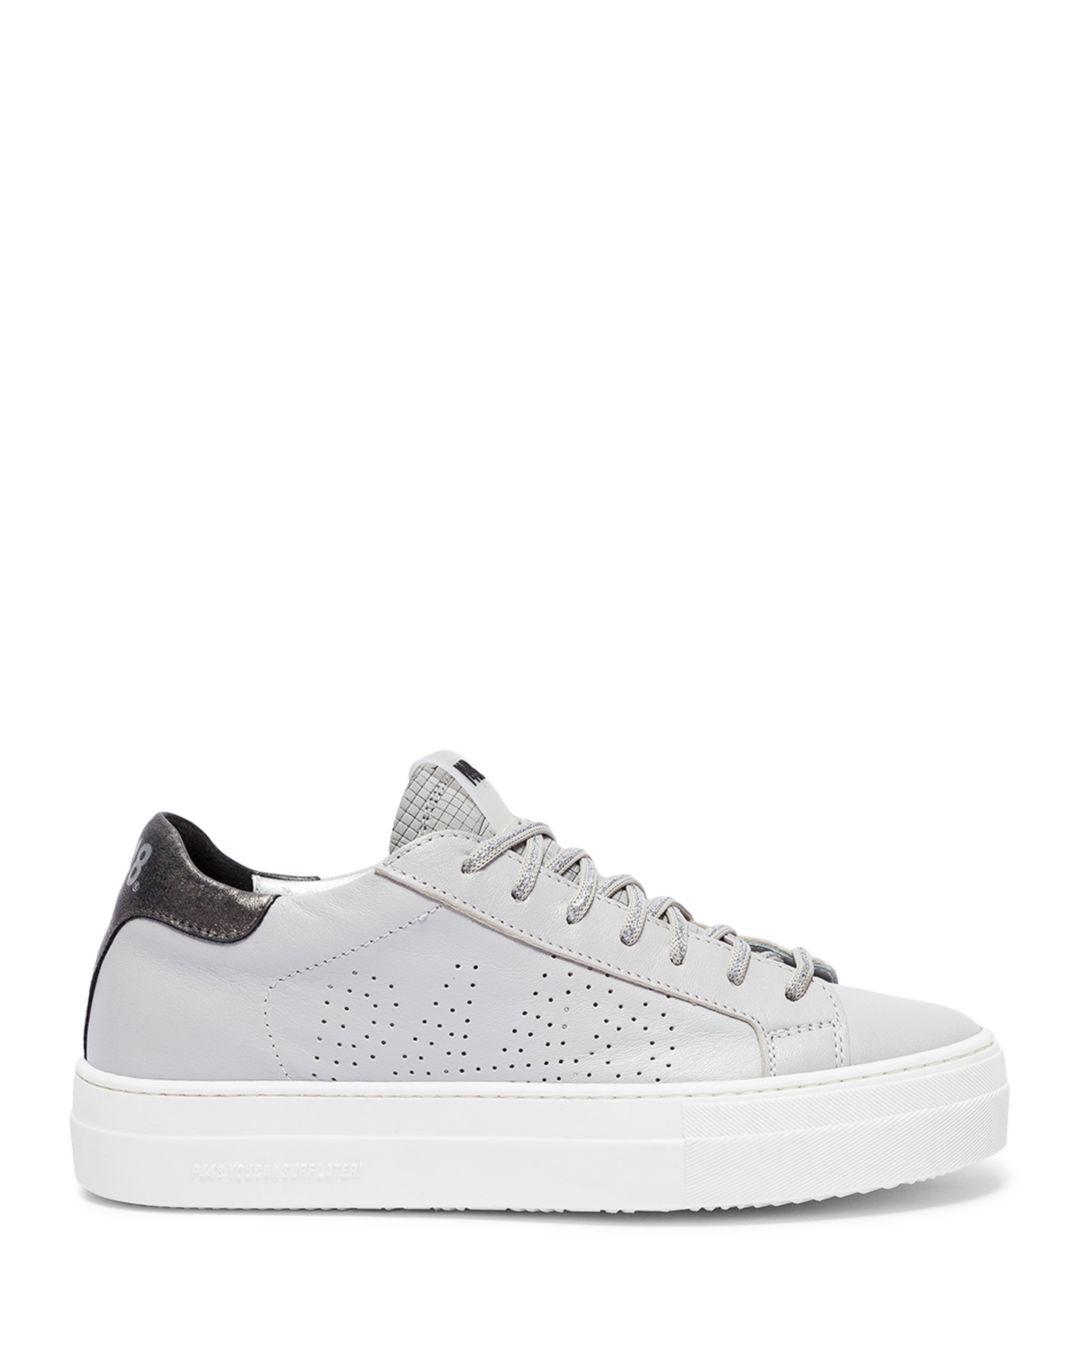 P448 F23 Thea Lace Up Low Top Sneakers in White | Lyst